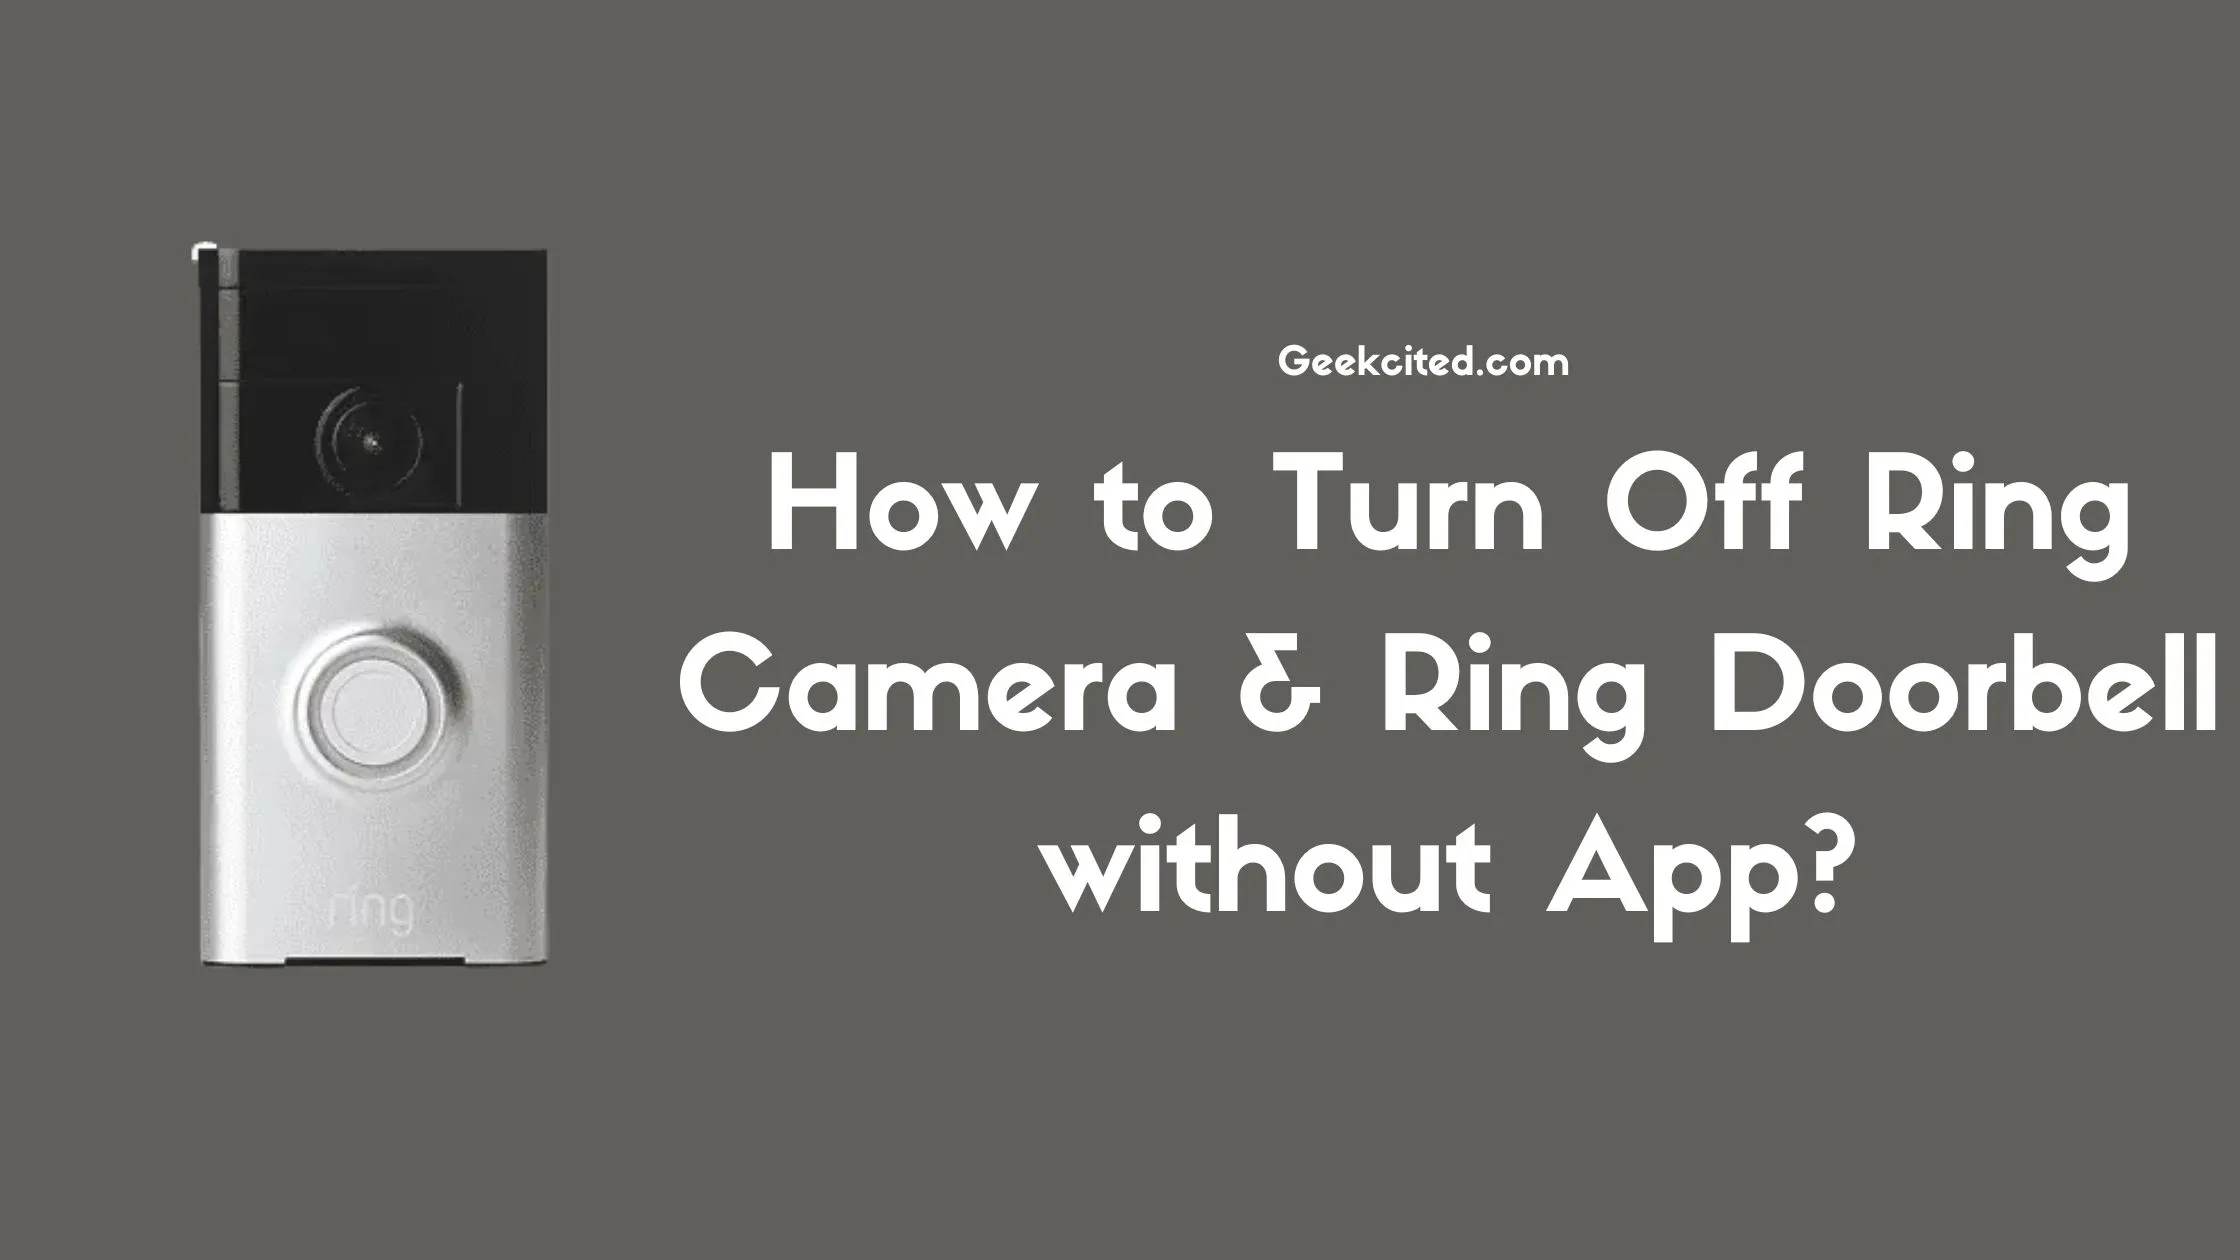 How to Turn Off Ring Camera & Ring Doorbell without App